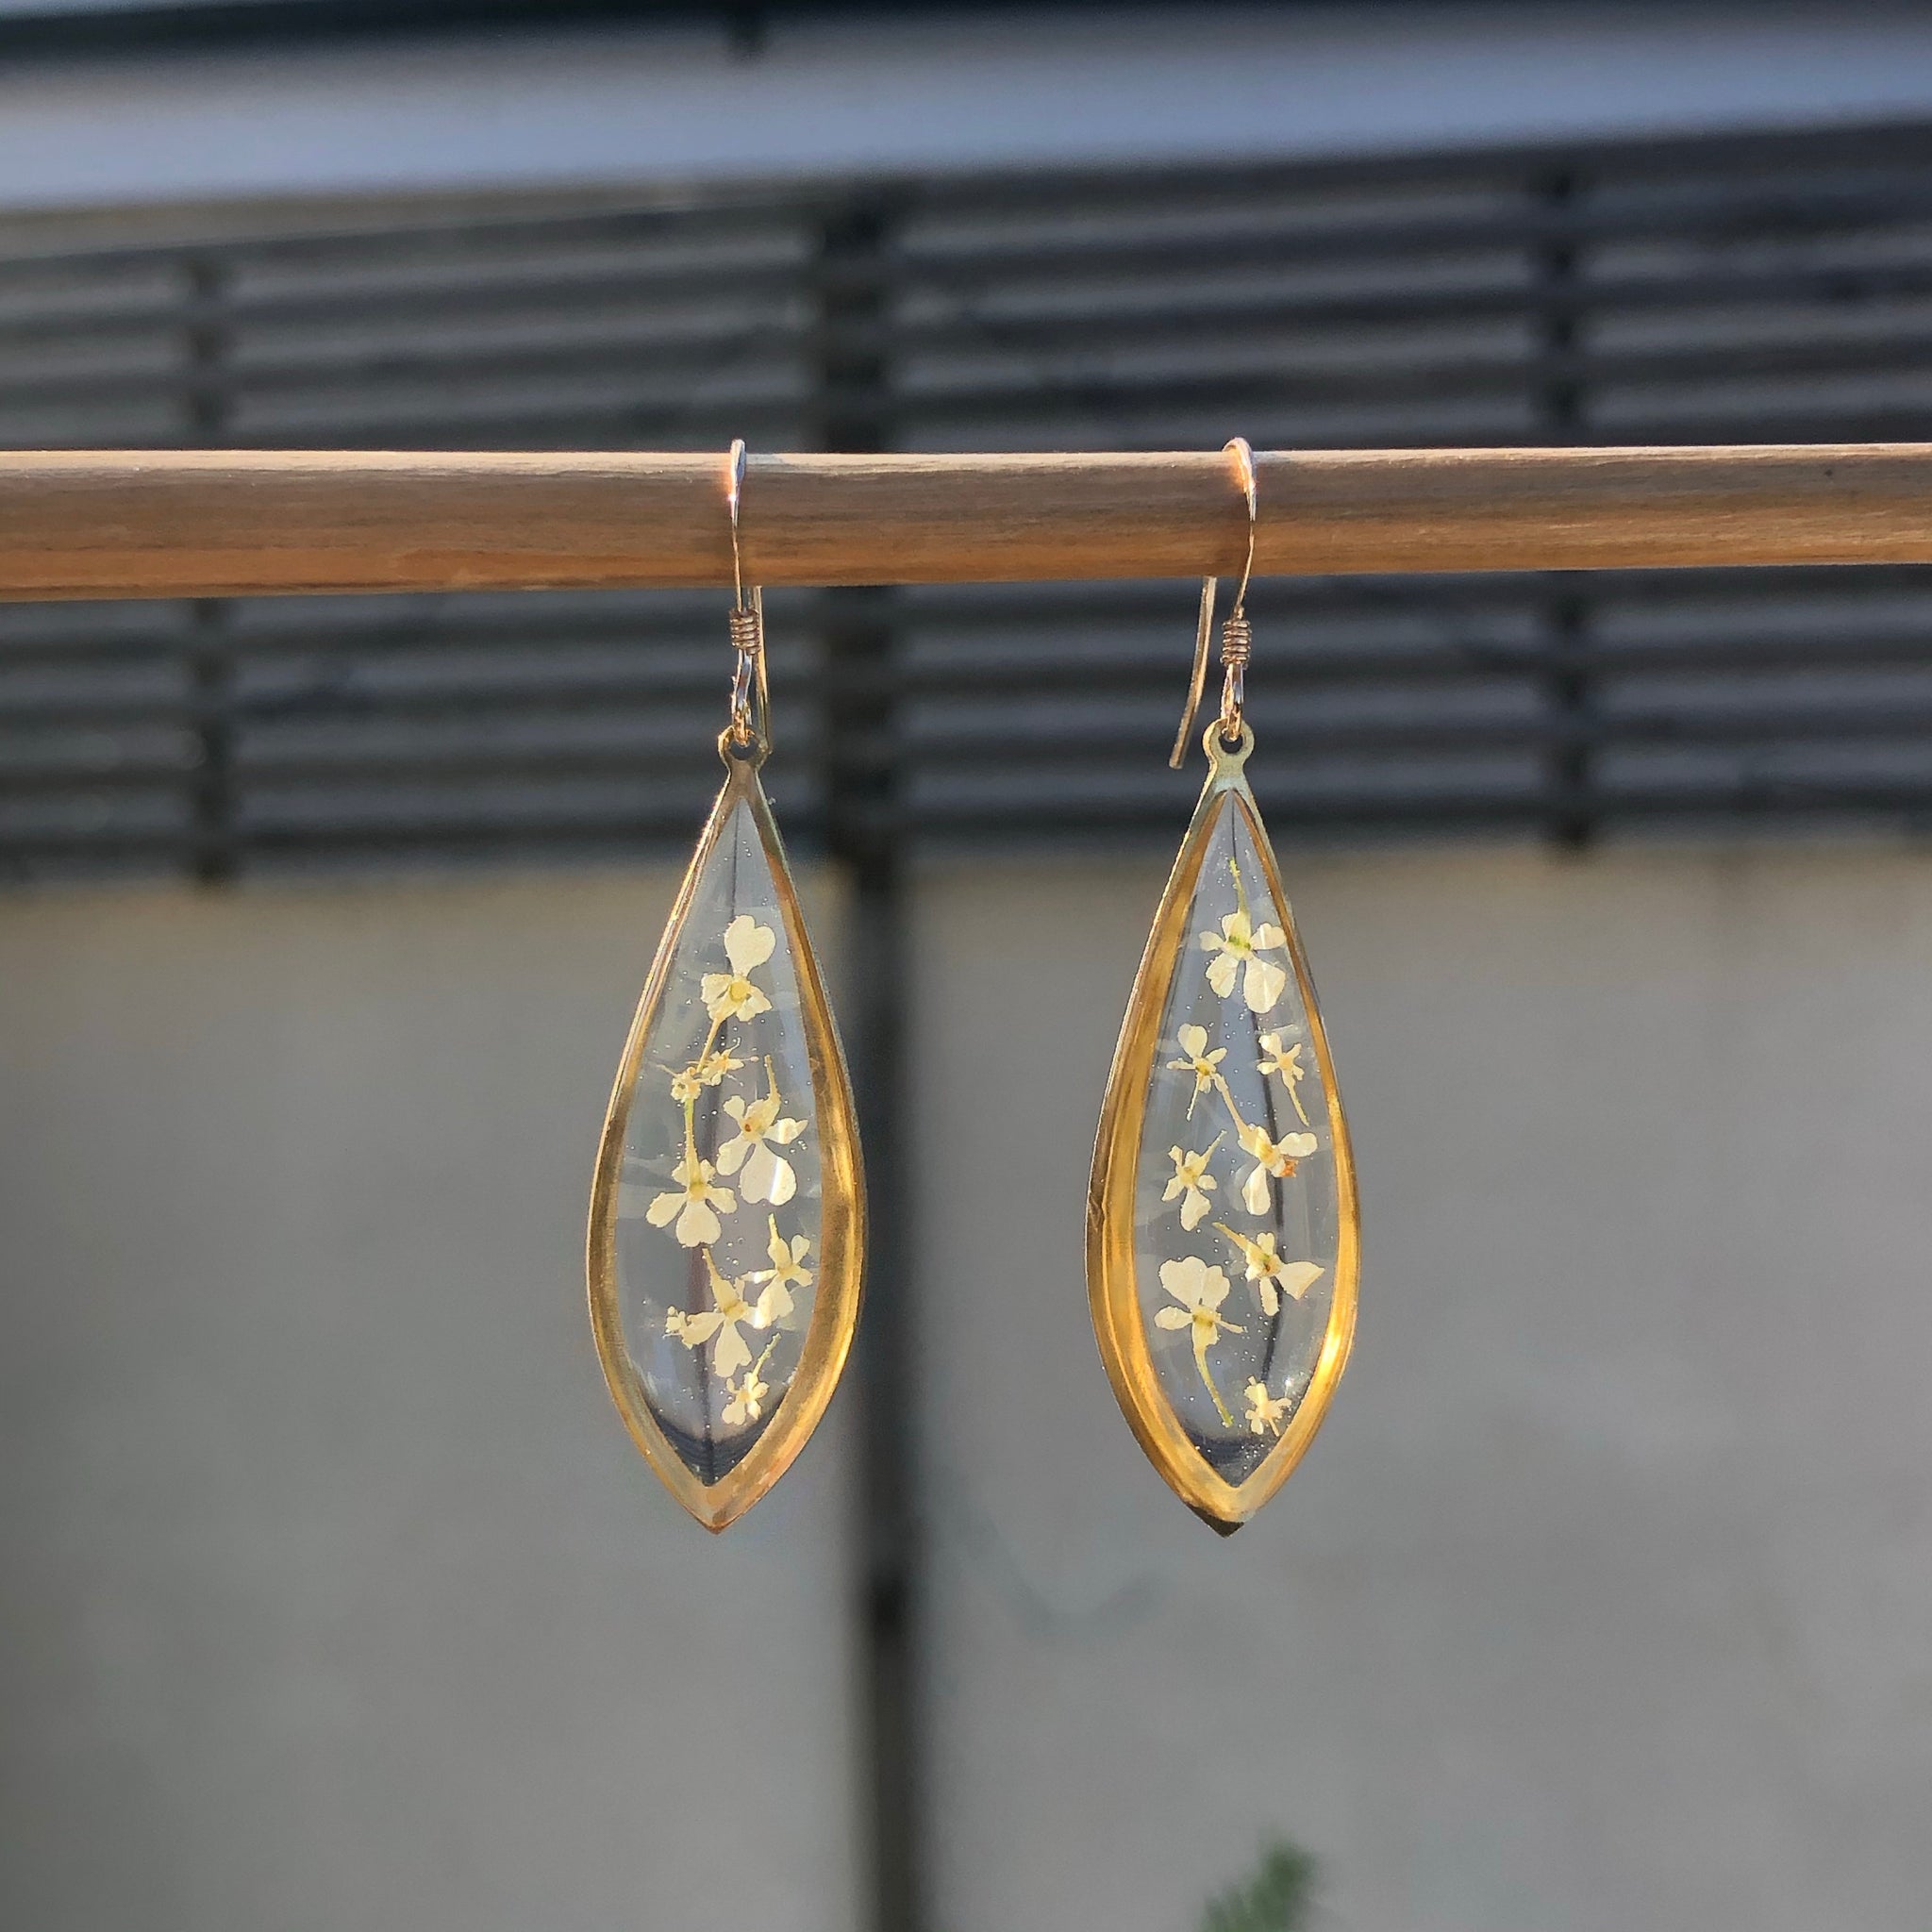 Gold Teardrop Earrings - click for different styles!